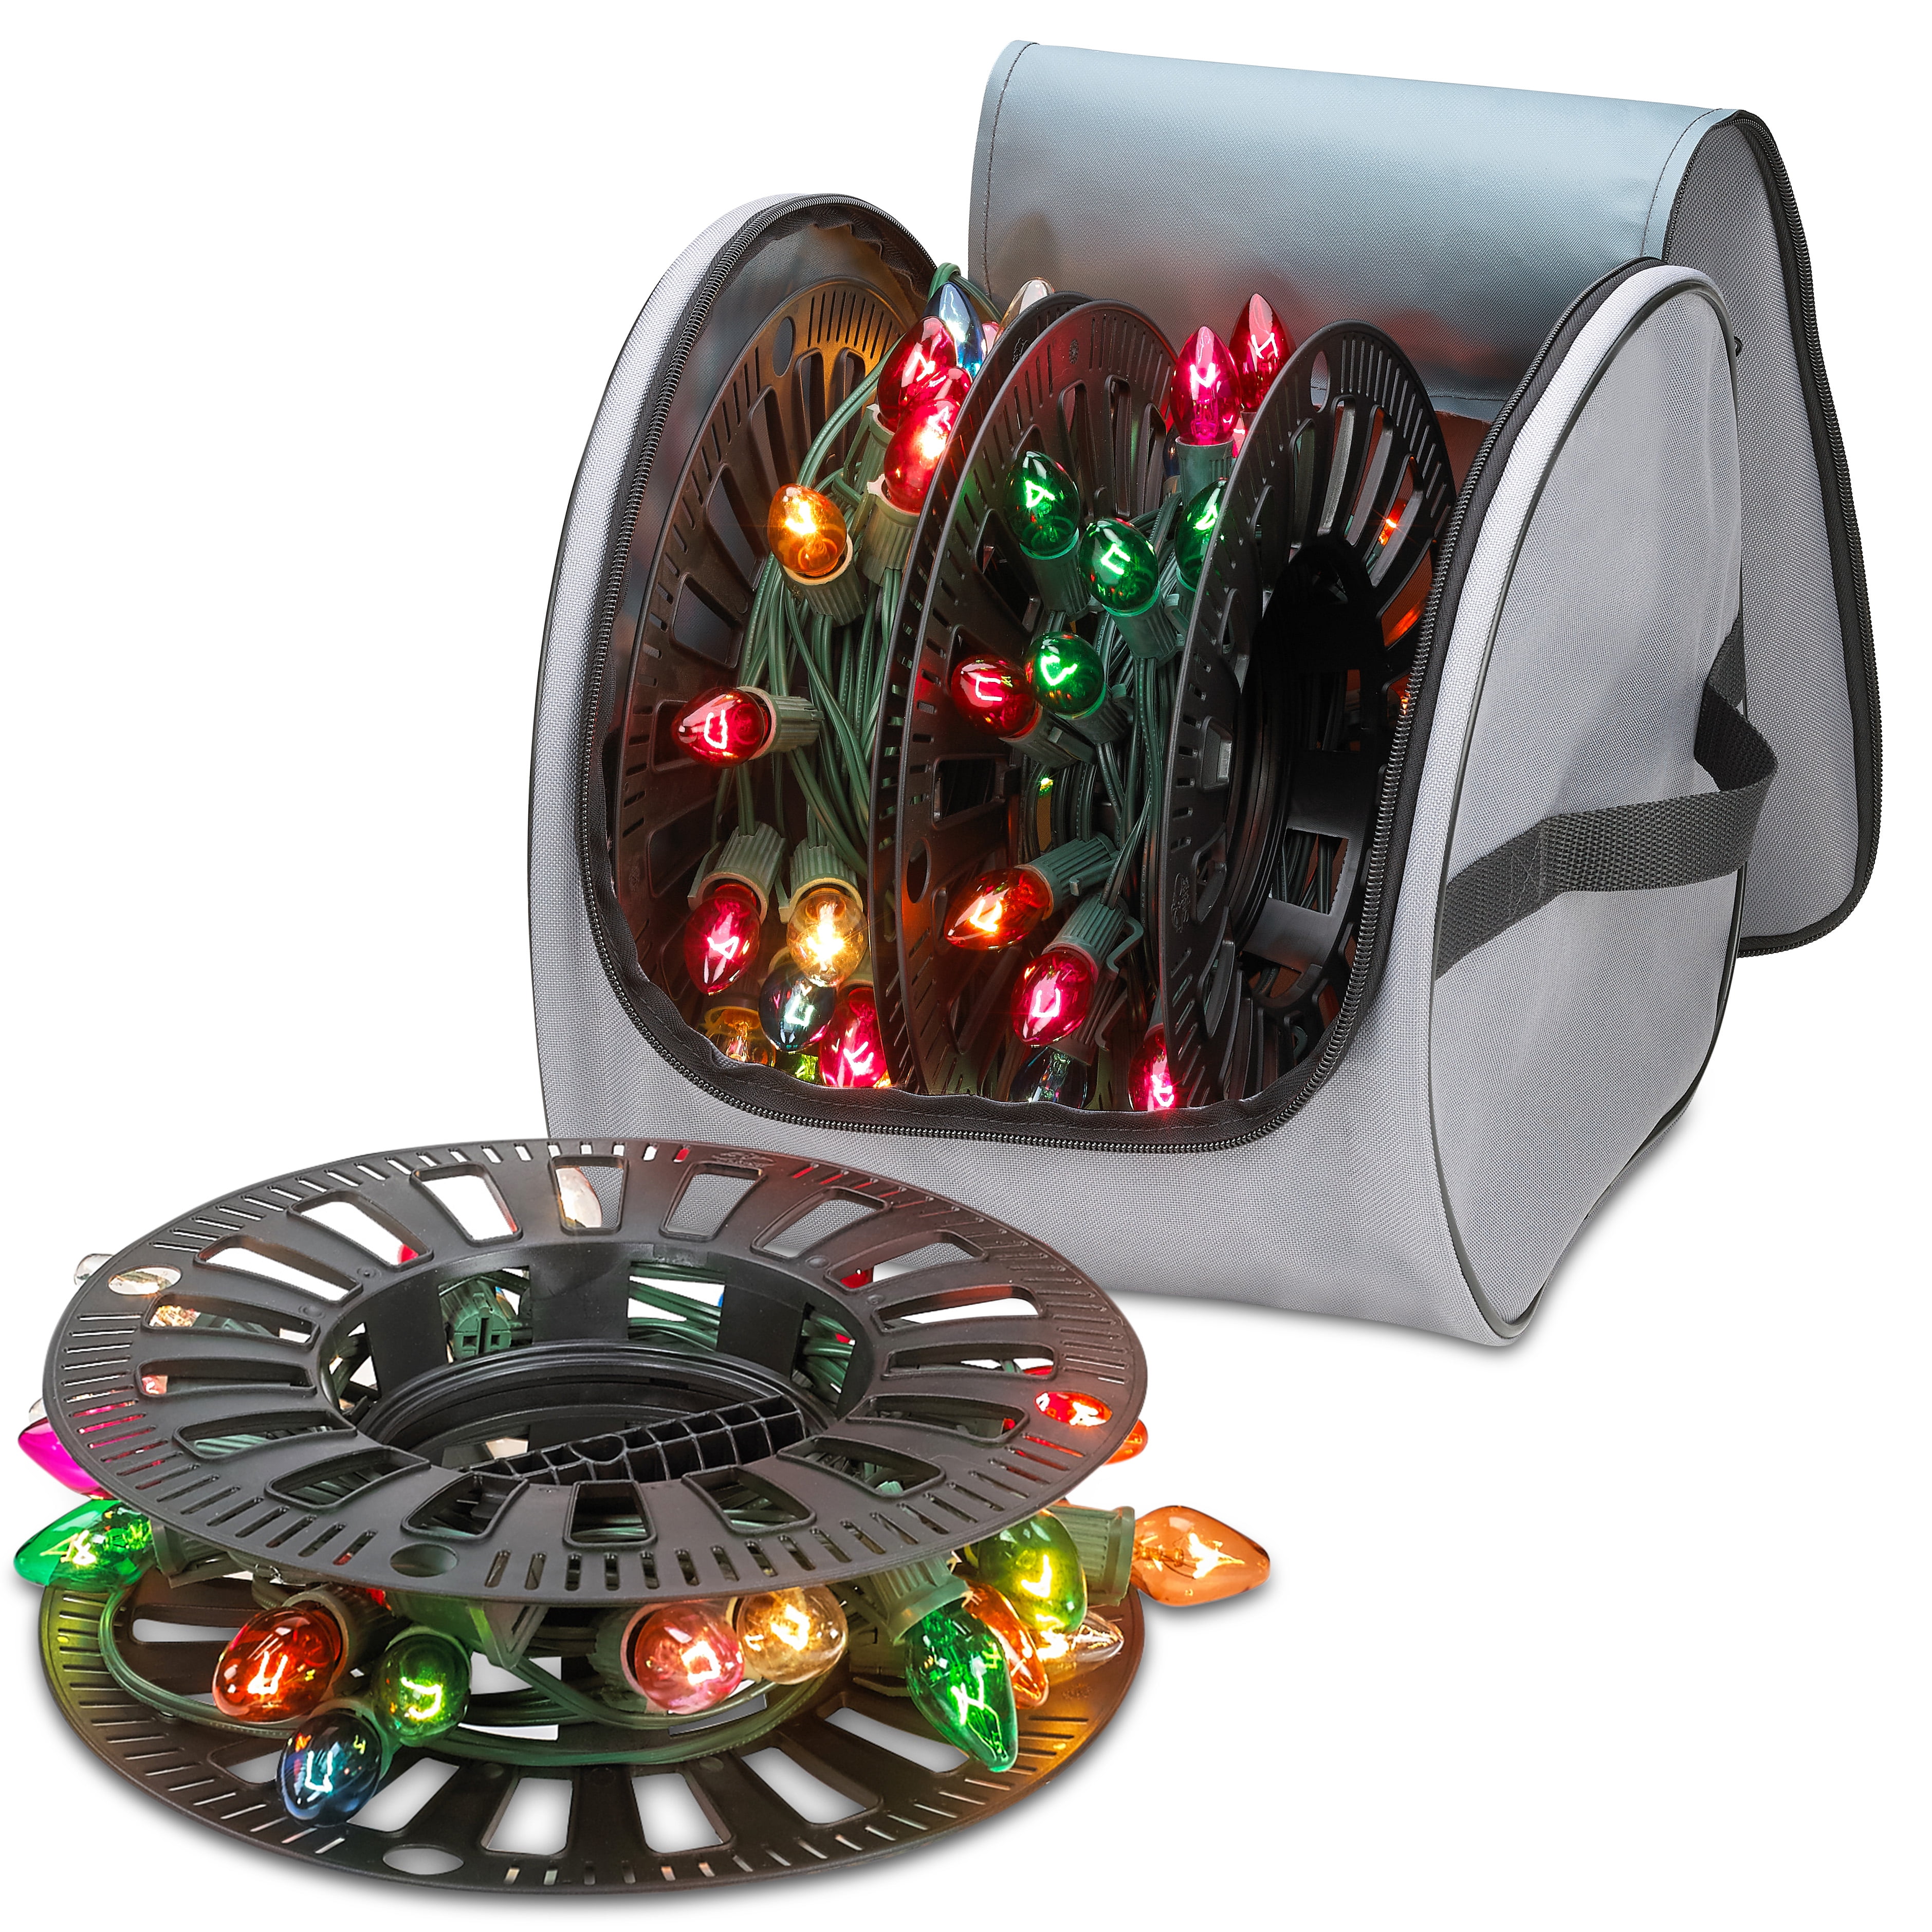 Premium Christmas Light Storage Bag ? Heavy Duty Tear Proof 600D/Inside PVC  Material with Reinforced Handles - with 3 Reels Stores up to 375 ft of Mini  Christmas Tree Lights & Extension